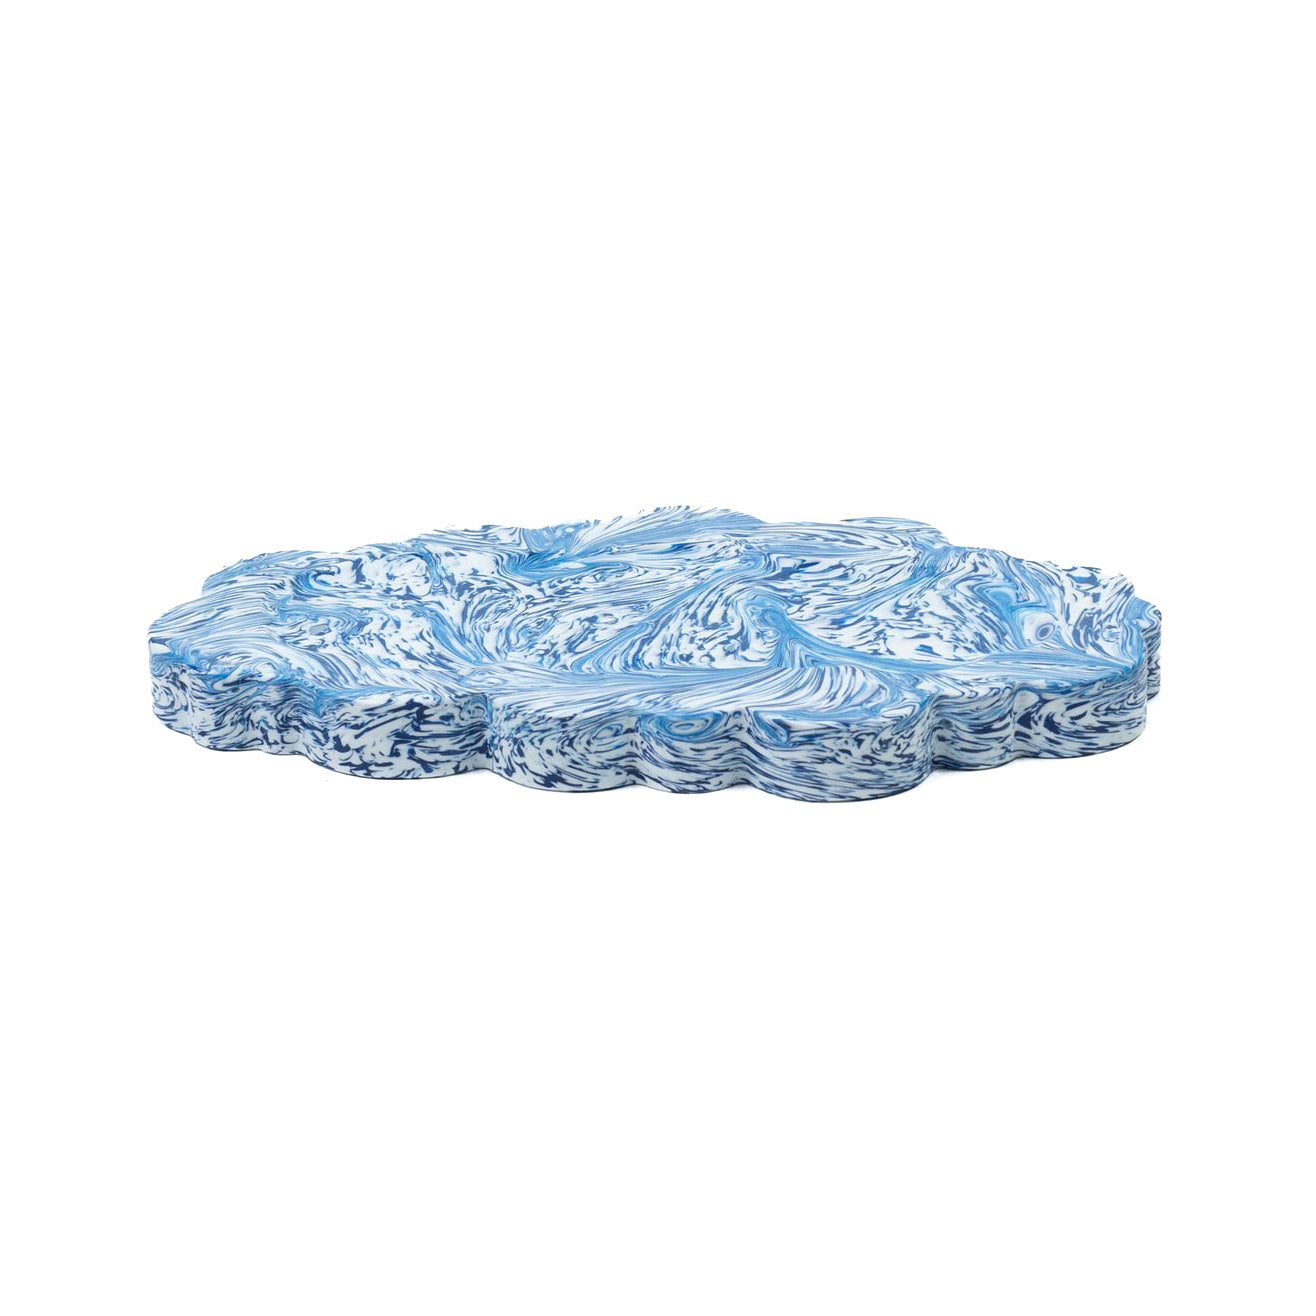 Clouded Desk Tray, Blue Wave